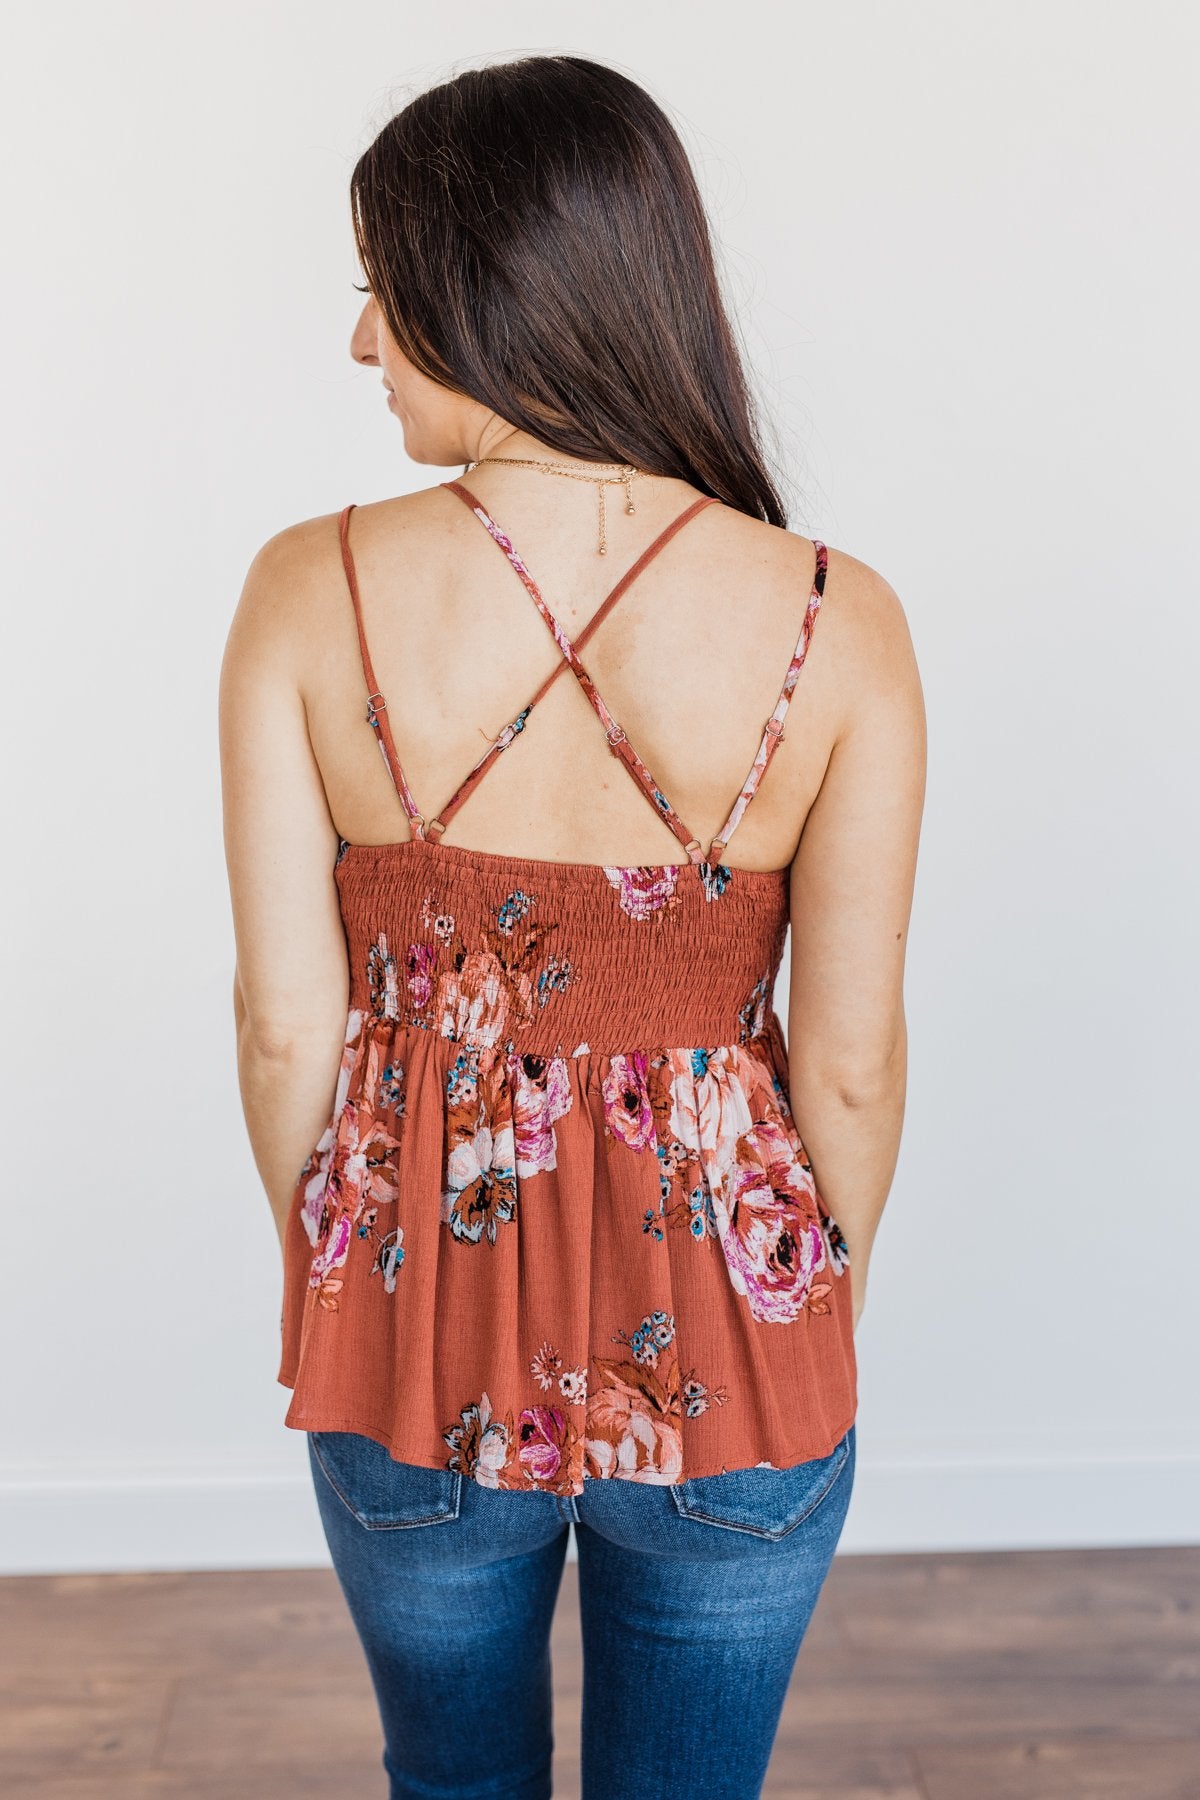 Autumn Delight Floral & Lace Tank Top- Dark Clay